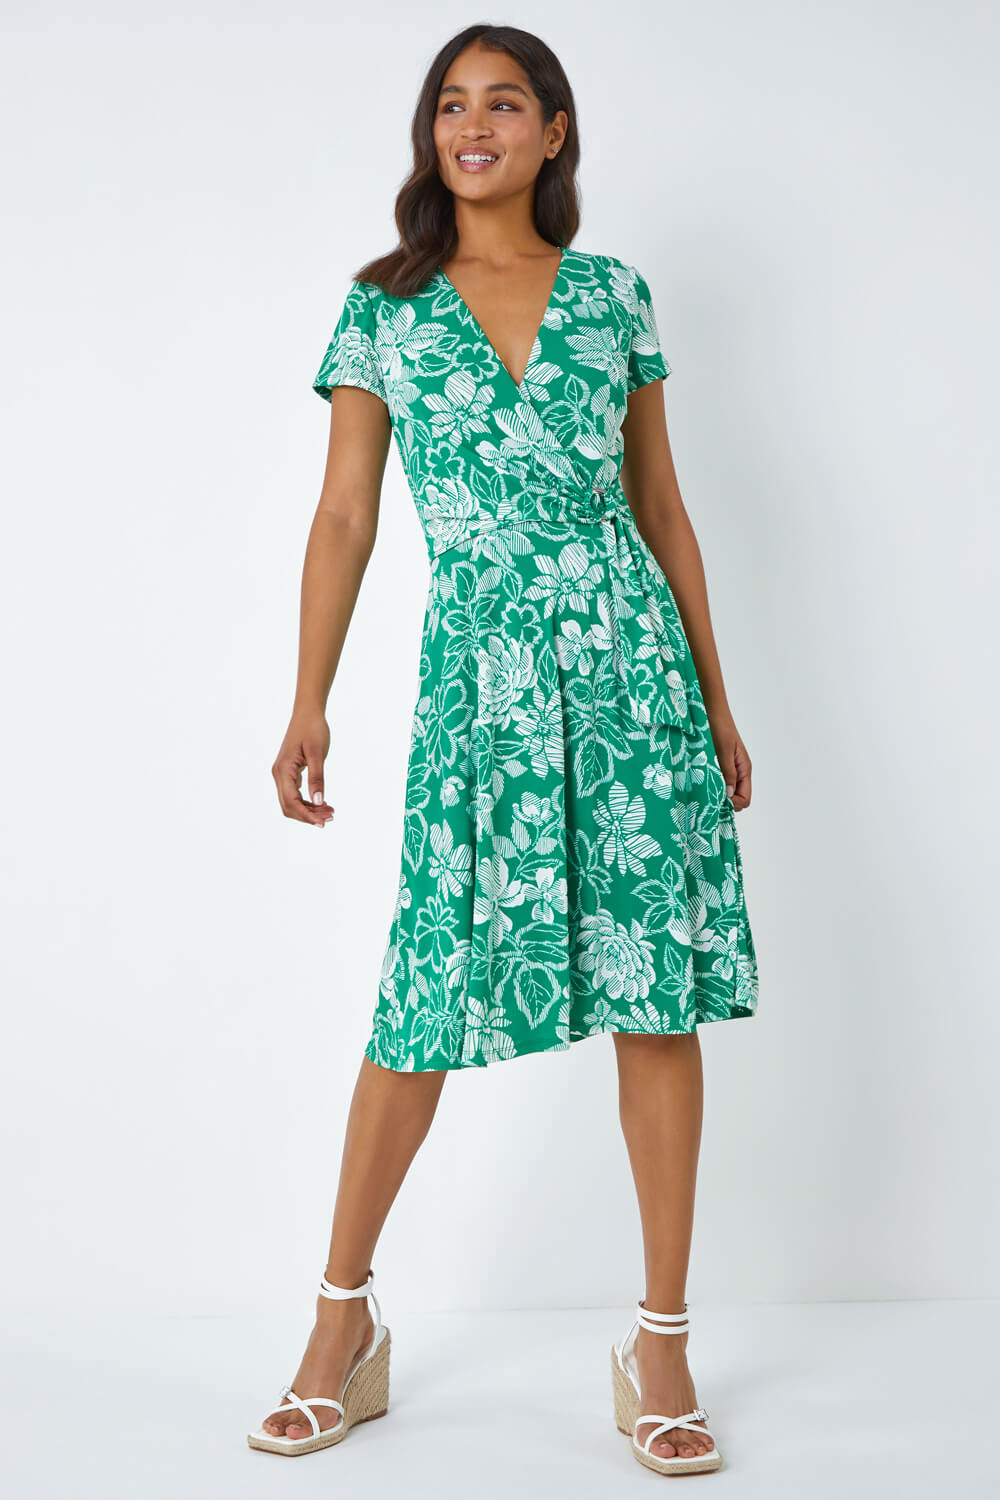 Green Floral Print Stretch Wrap Dress, Image 2 of 5